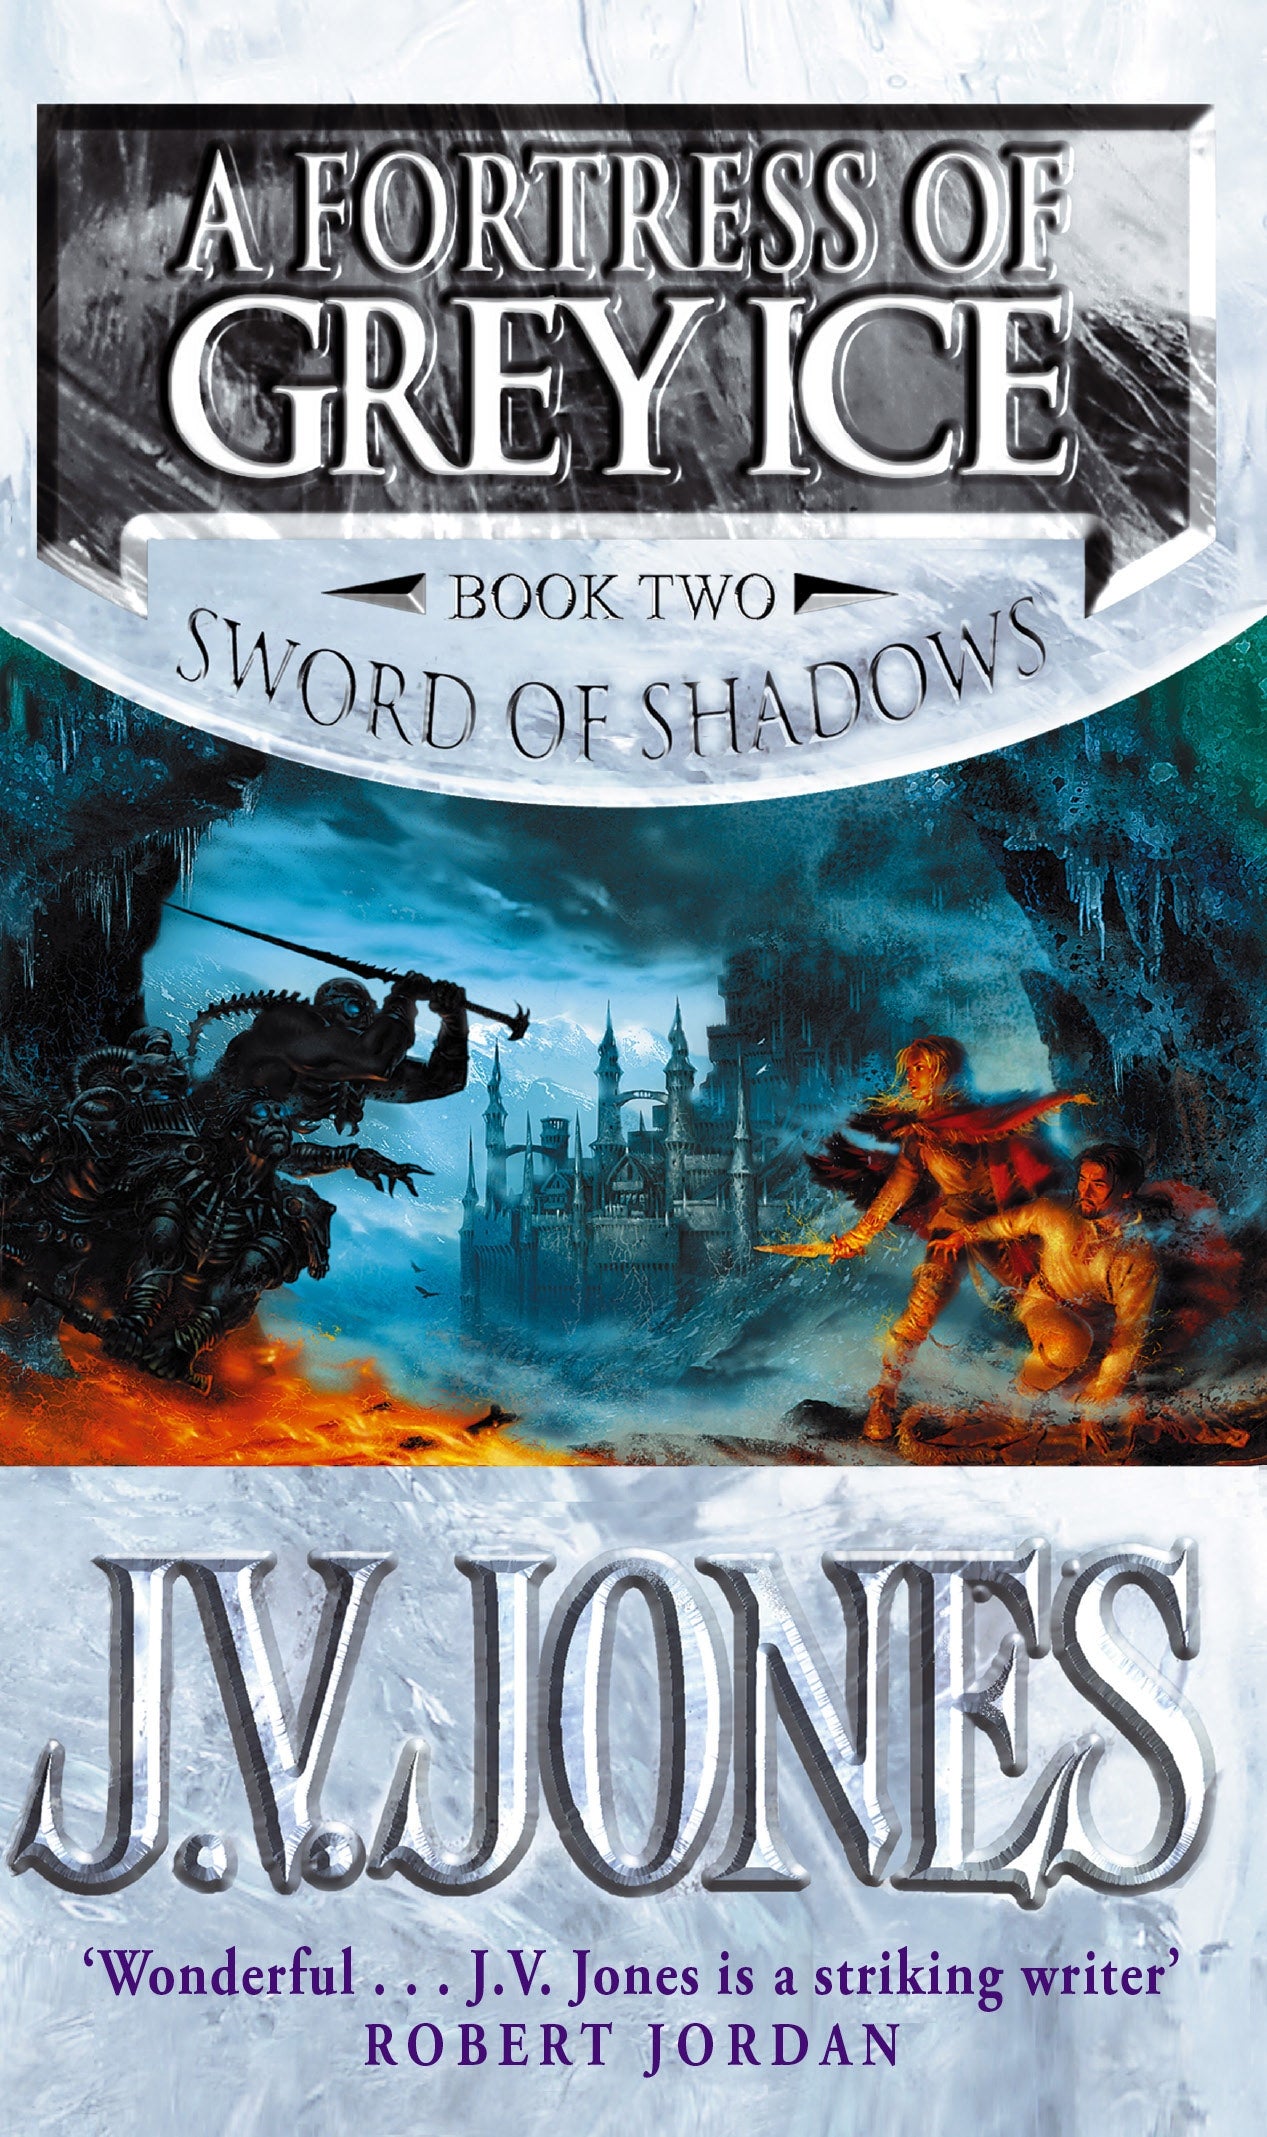 A Fortress Of Grey Ice by J V Jones